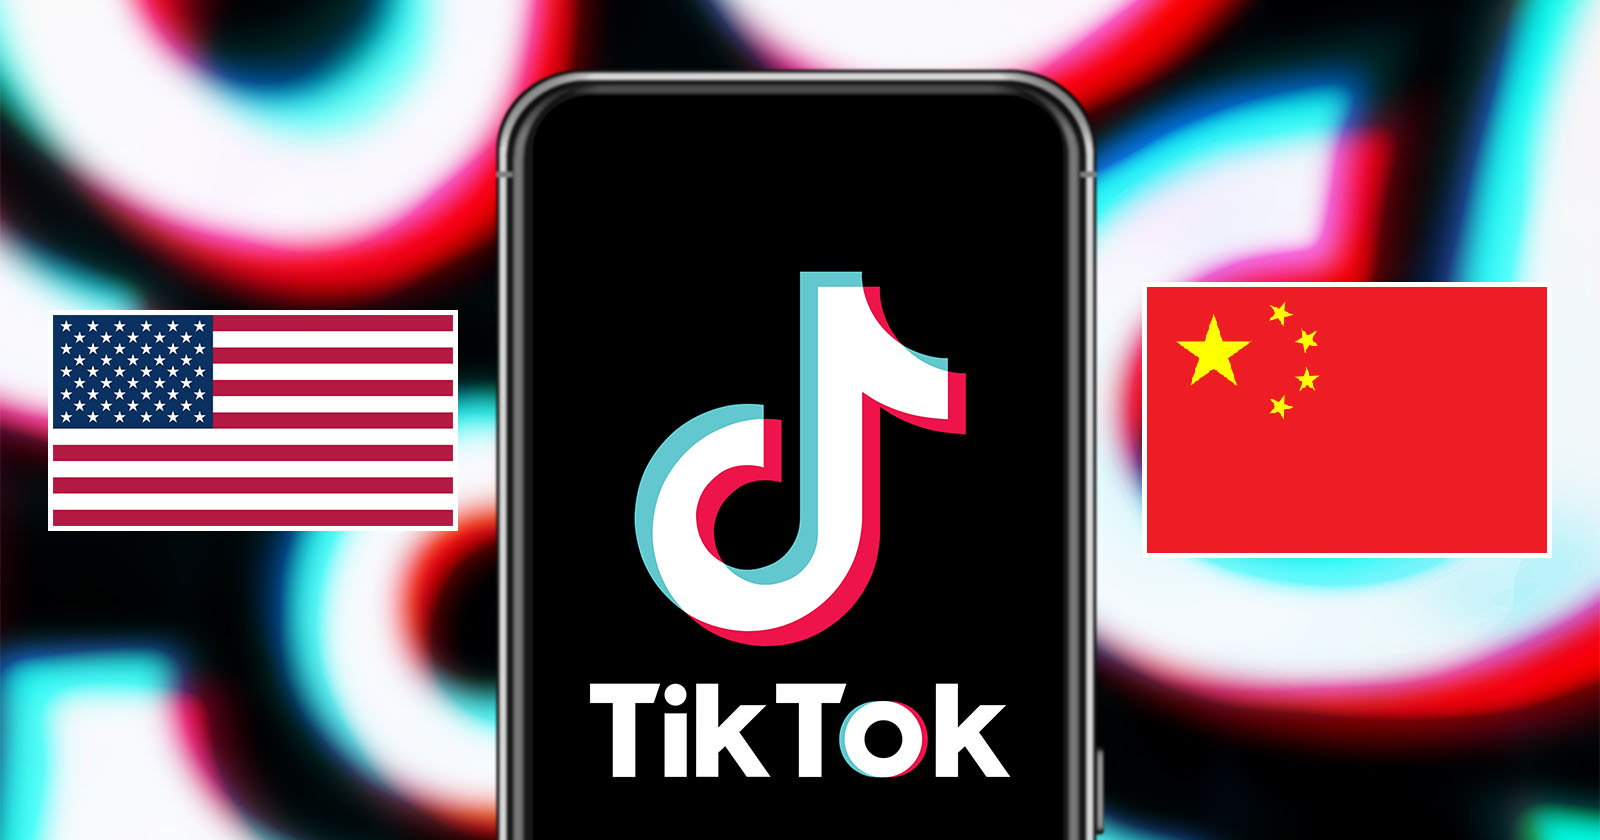 President Biden Signs Bill Forcing TikTok to Sell or Face Ban